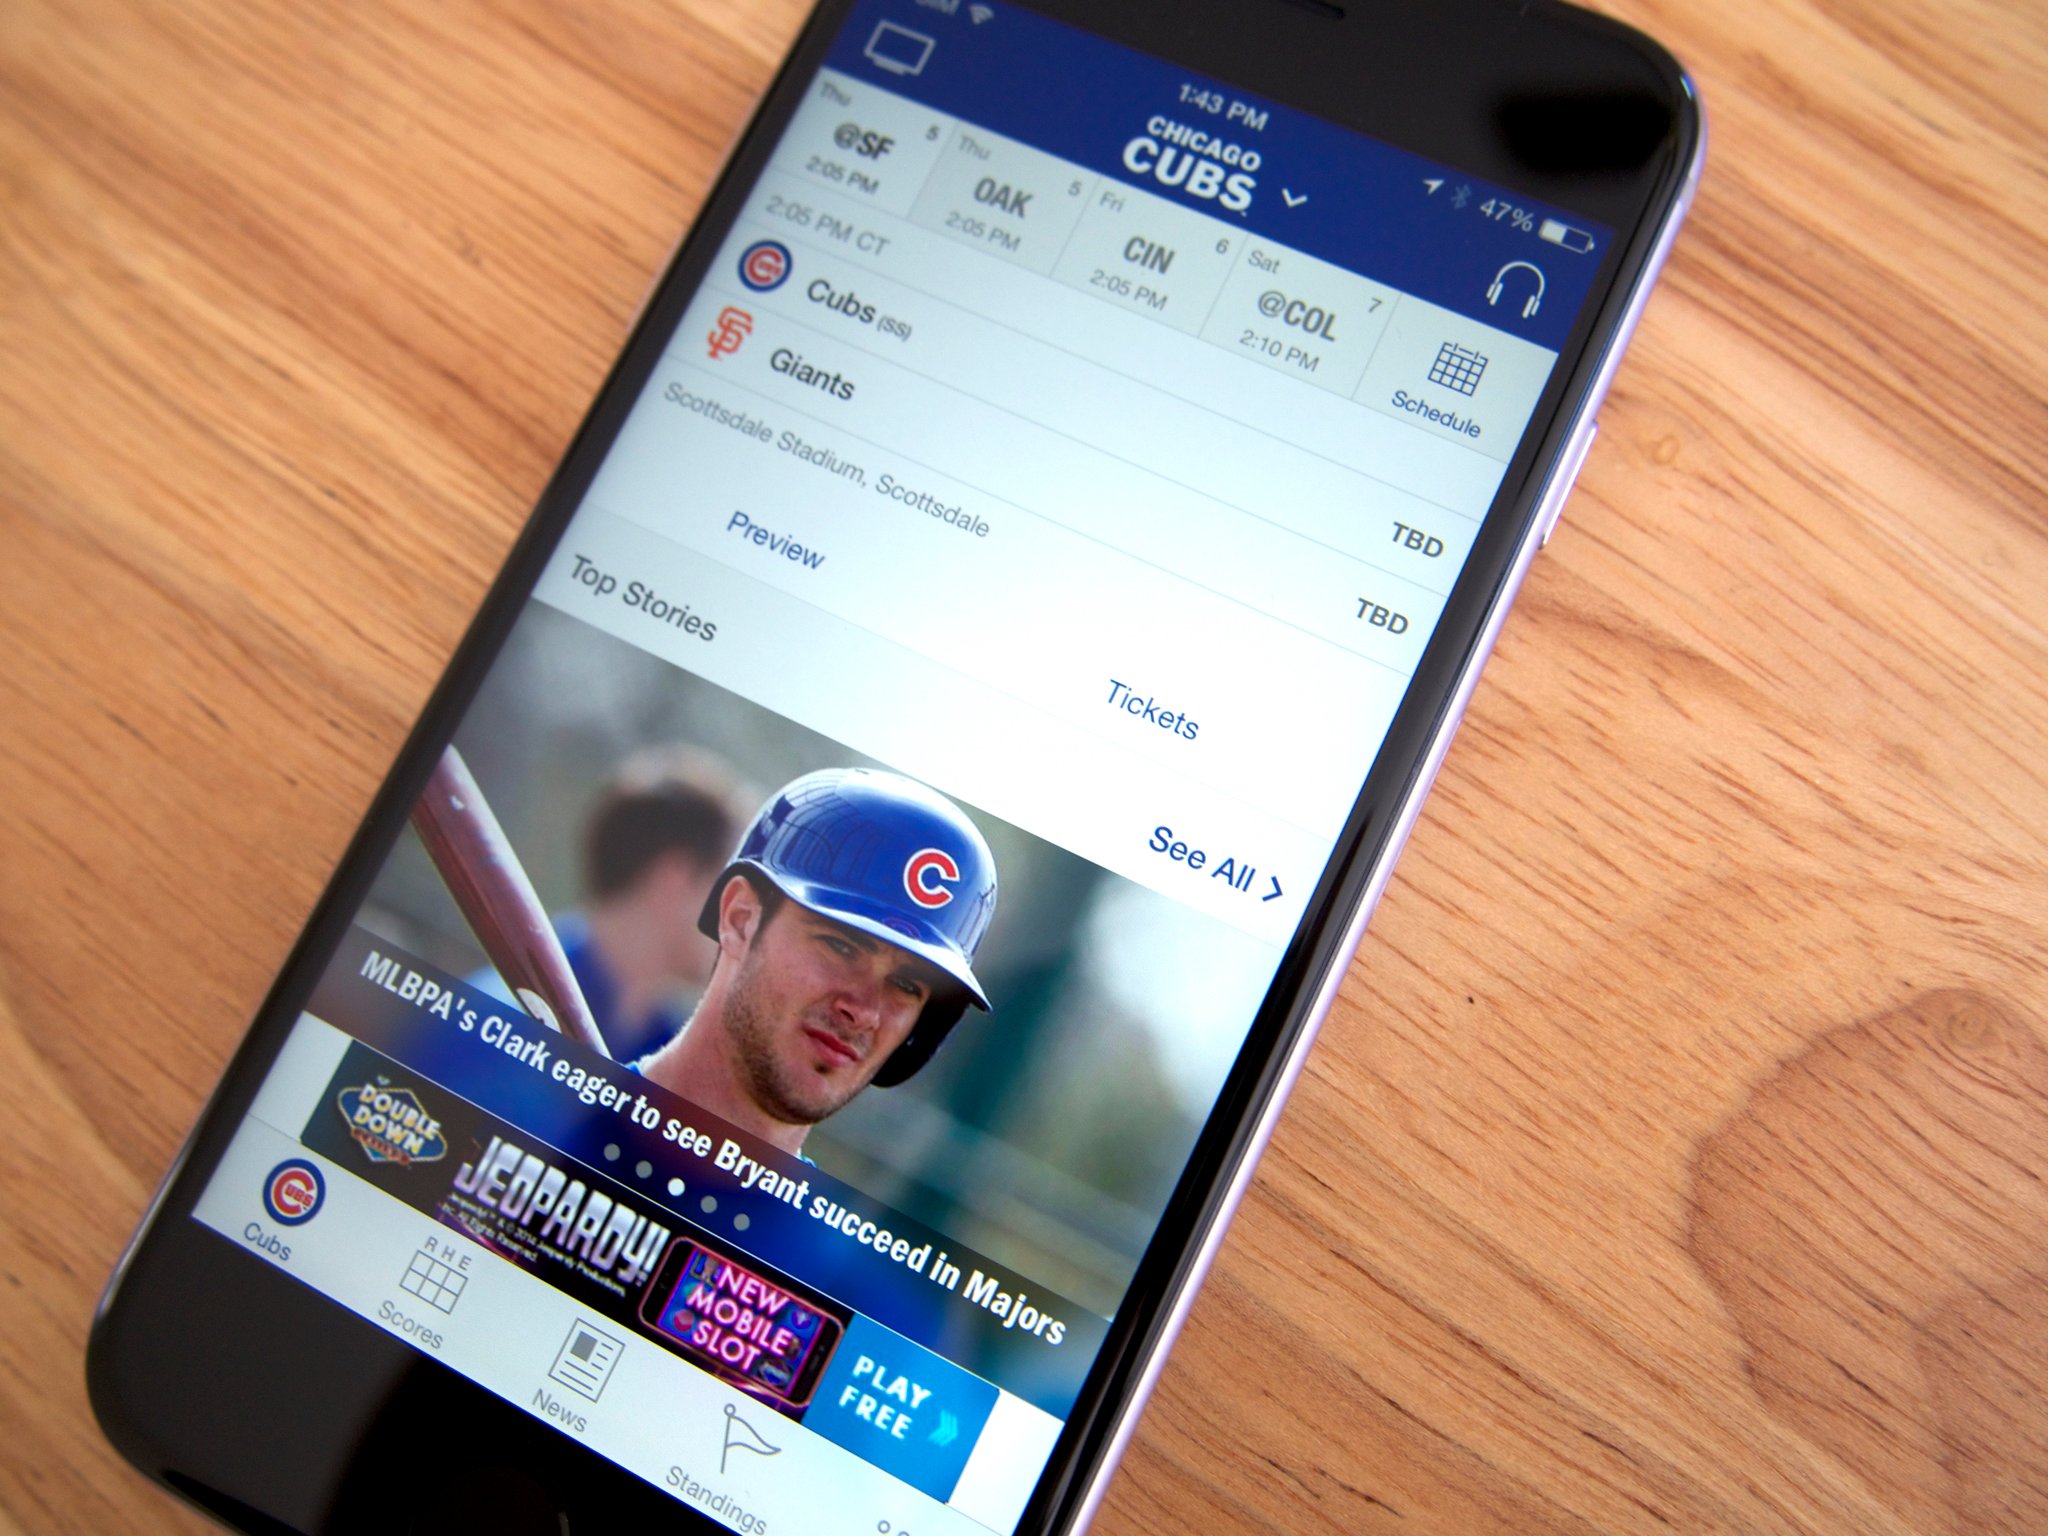 T-Mobile customers can sign up for MLB.TV Premium for free during